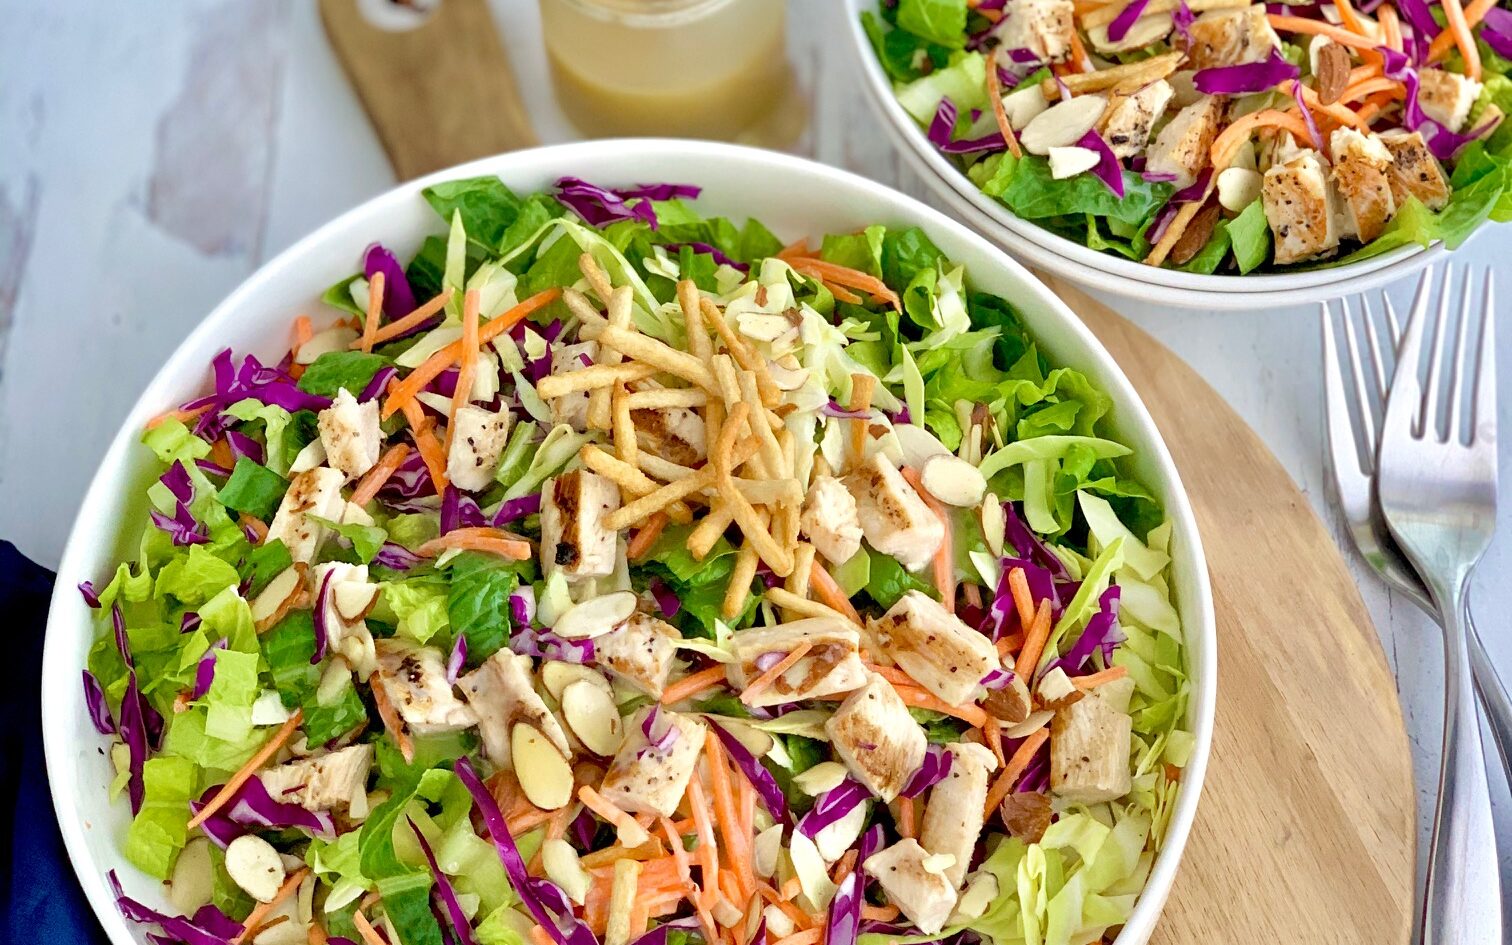 A large salad in a serving platter. The salad has cuts of romaine lettuce, purple cabbage, light green napa cabbage, chunks of grilled chicken, shredded carrots, and lots of sliced almonds. There is even a few strips of wonton strips.